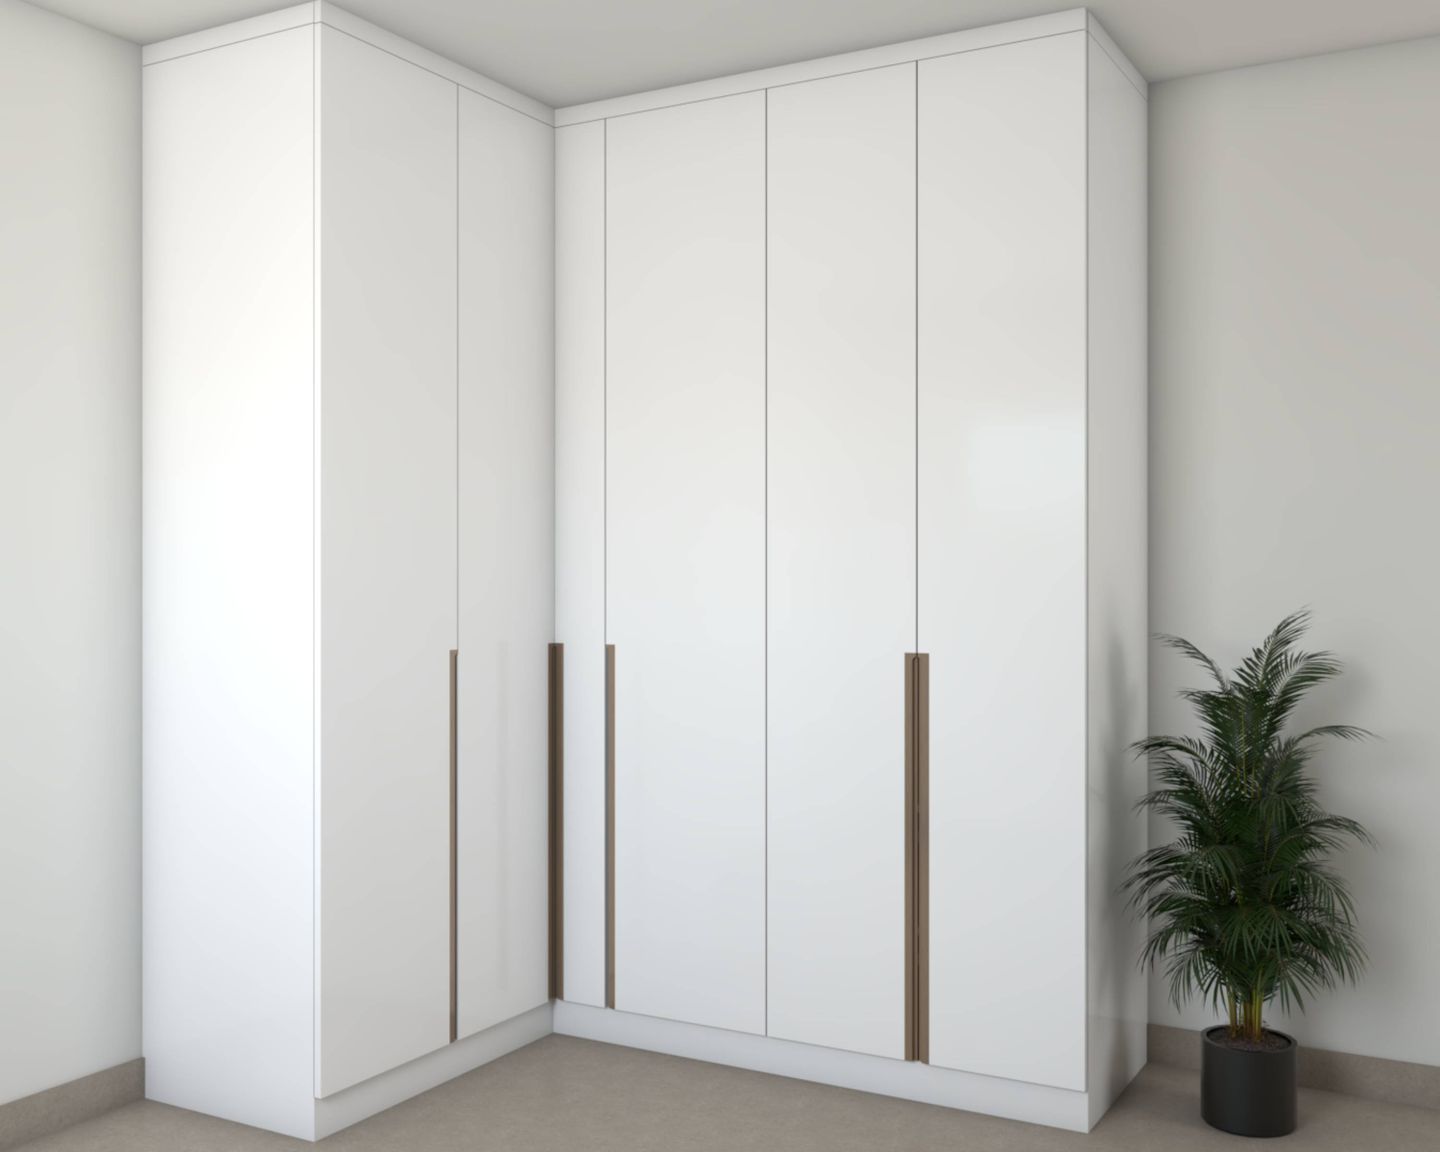 L-Shaped White Wardrobe With Woosen Finger Groove Handles - Livspace